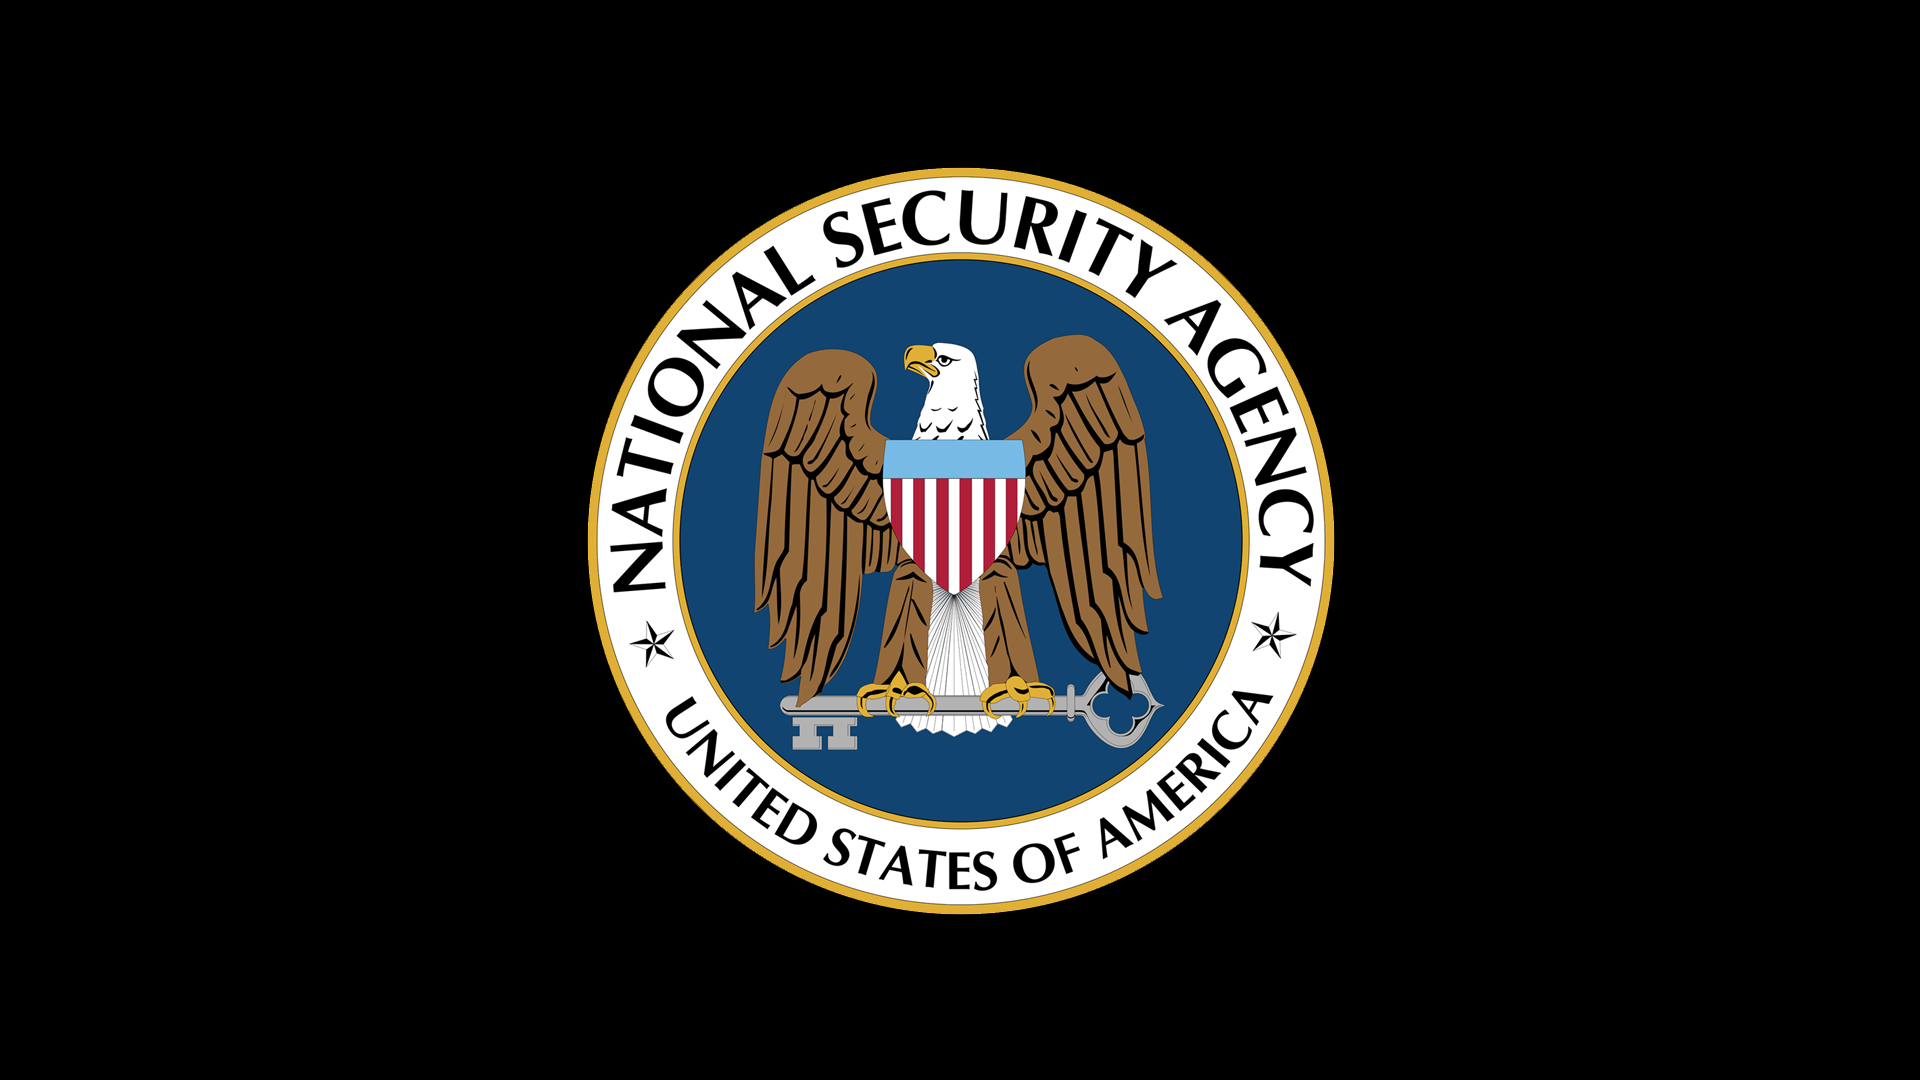 84+ National Security Agency Wallpapers.